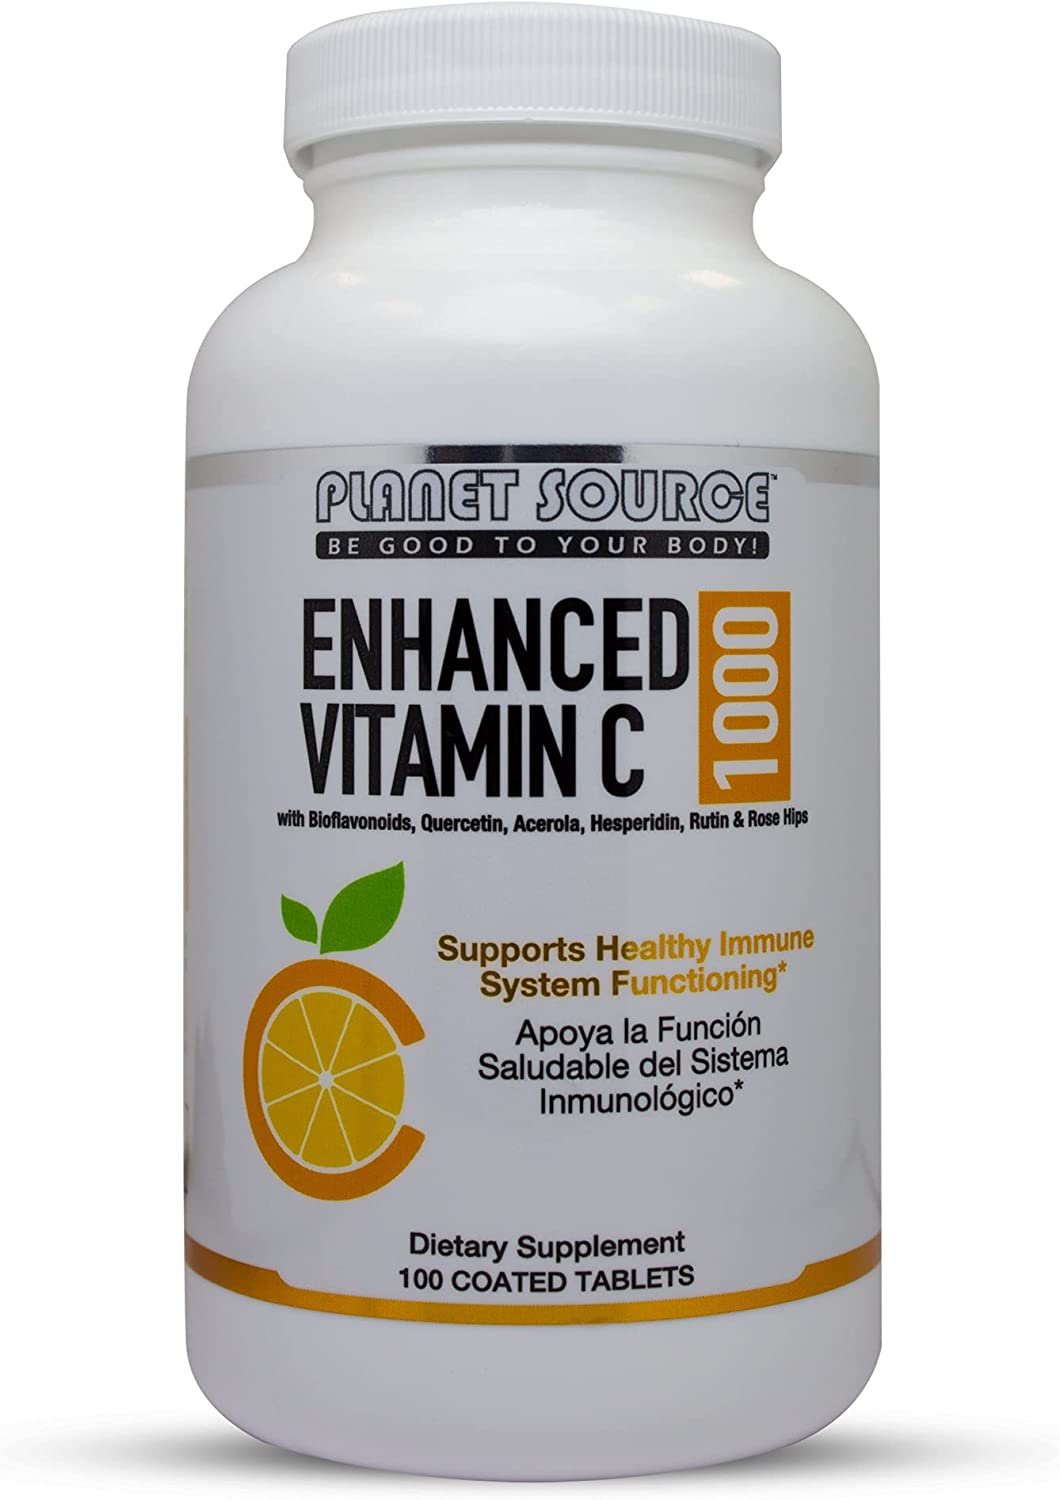 Enhanced Vitamin C 1000 mg -100 Coated Tablets - Natural, Acerola, Citrus Bioflavonoids, Rose Hips, Rutin, Quercetin & Hesperidin for Increased Absorption - Advanced Immune Support - Non-GMO